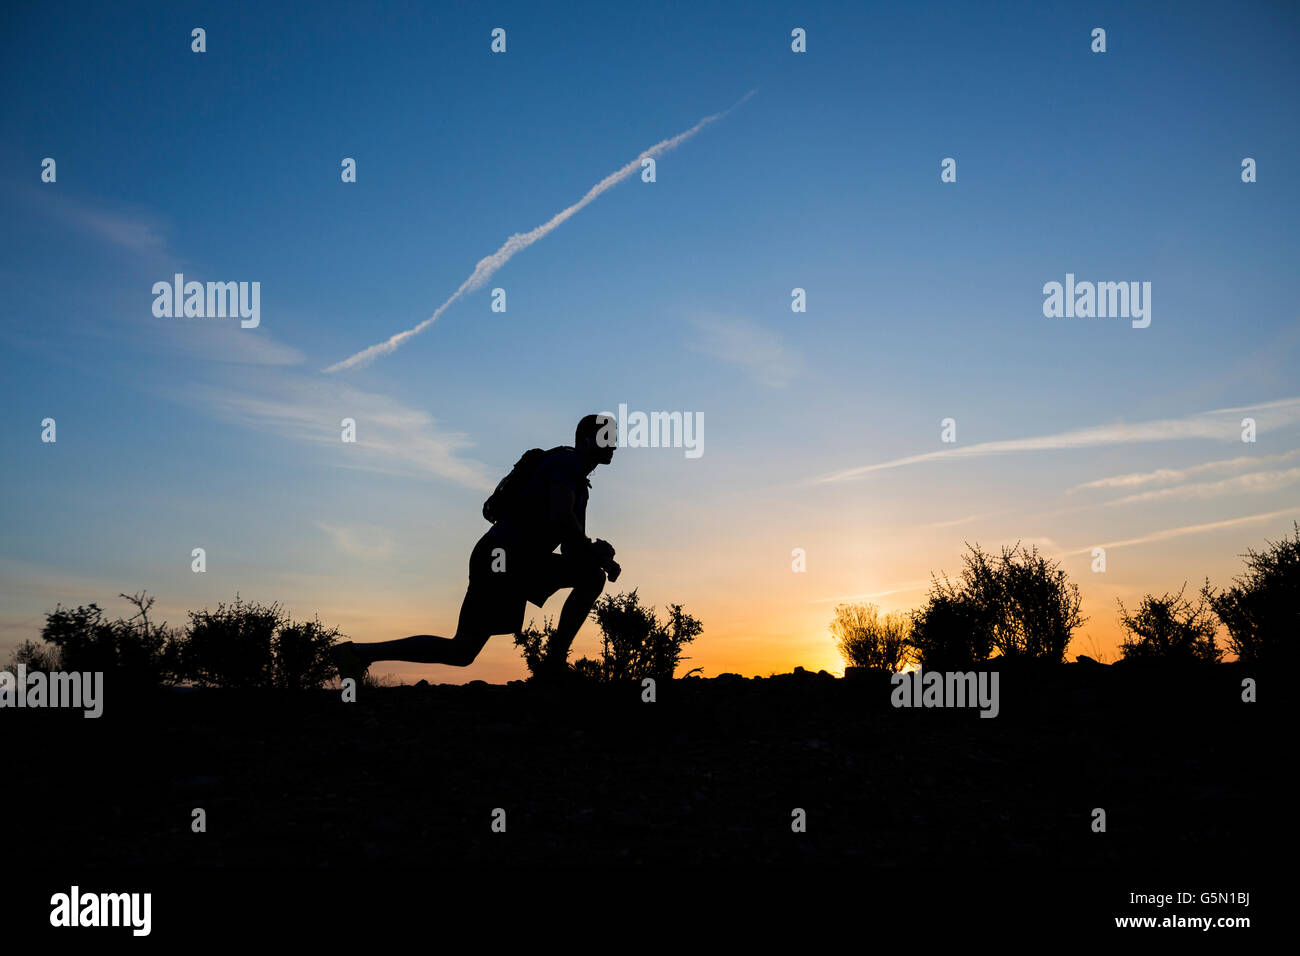 Silhouette of Caucasian teenage boy running at dawn Banque D'Images